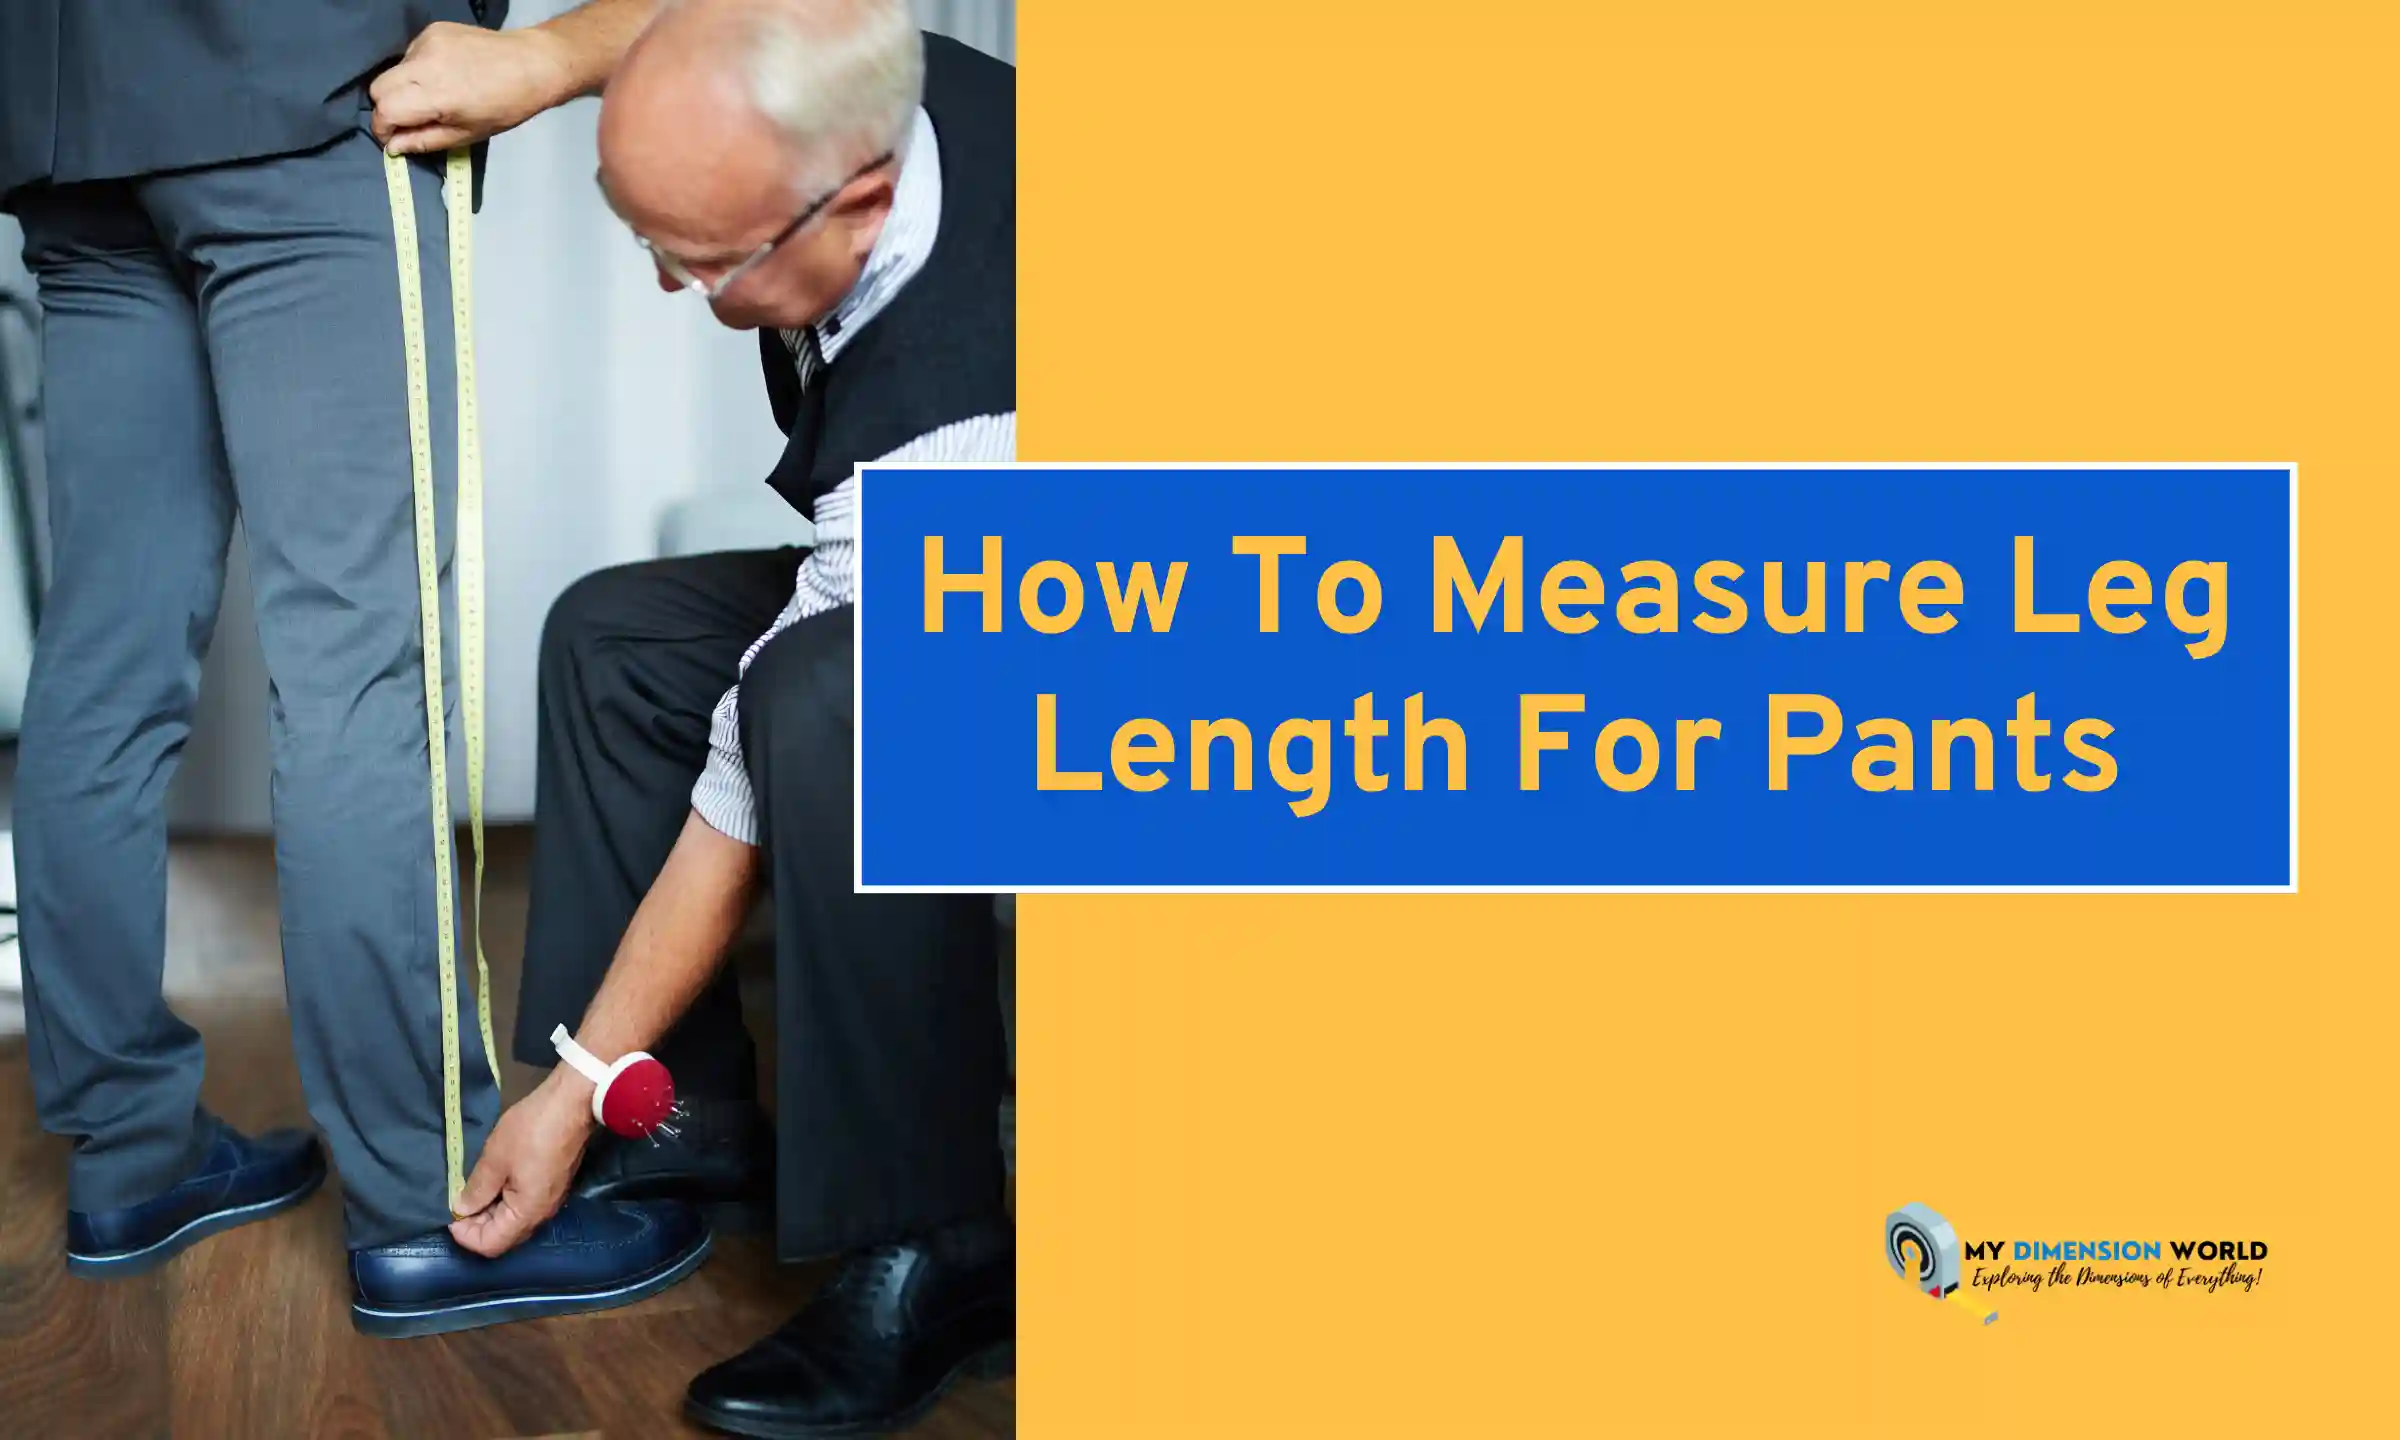 How To Measure Leg Length For Pants